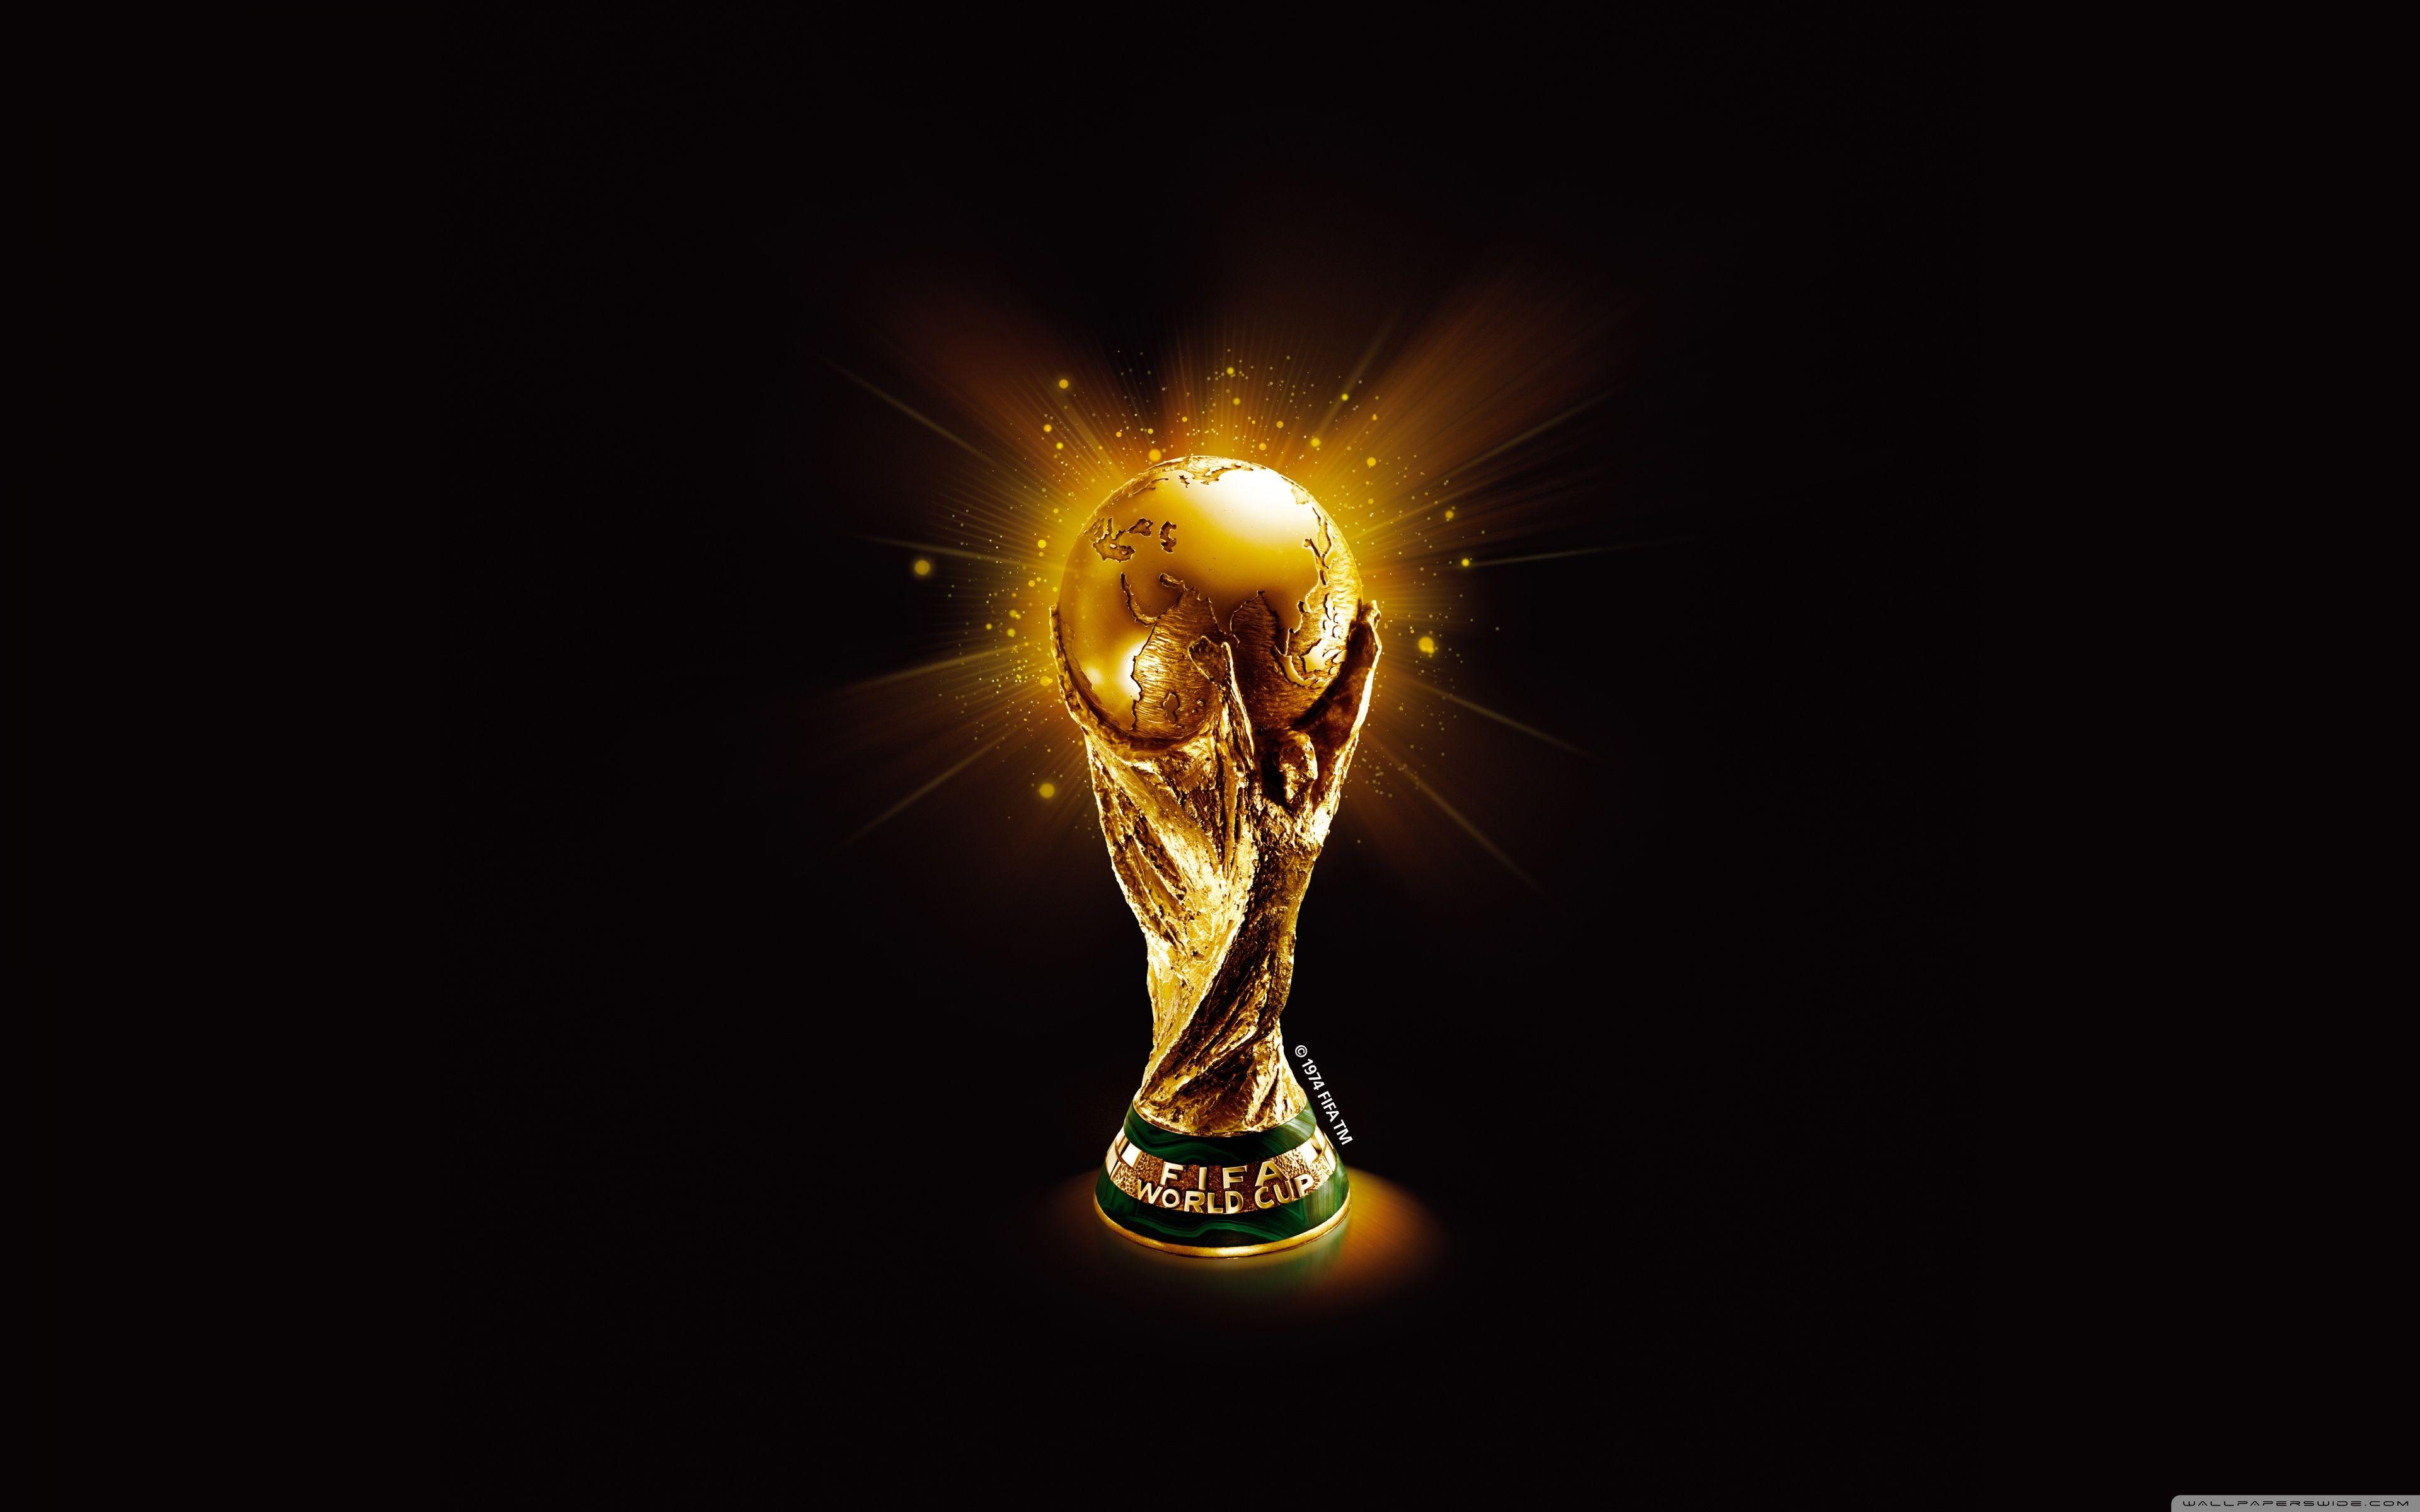 WORLD CUP 2022 WALLPAPER on Behance in 2023  World cup Fifa world cup  Fifa world cup france